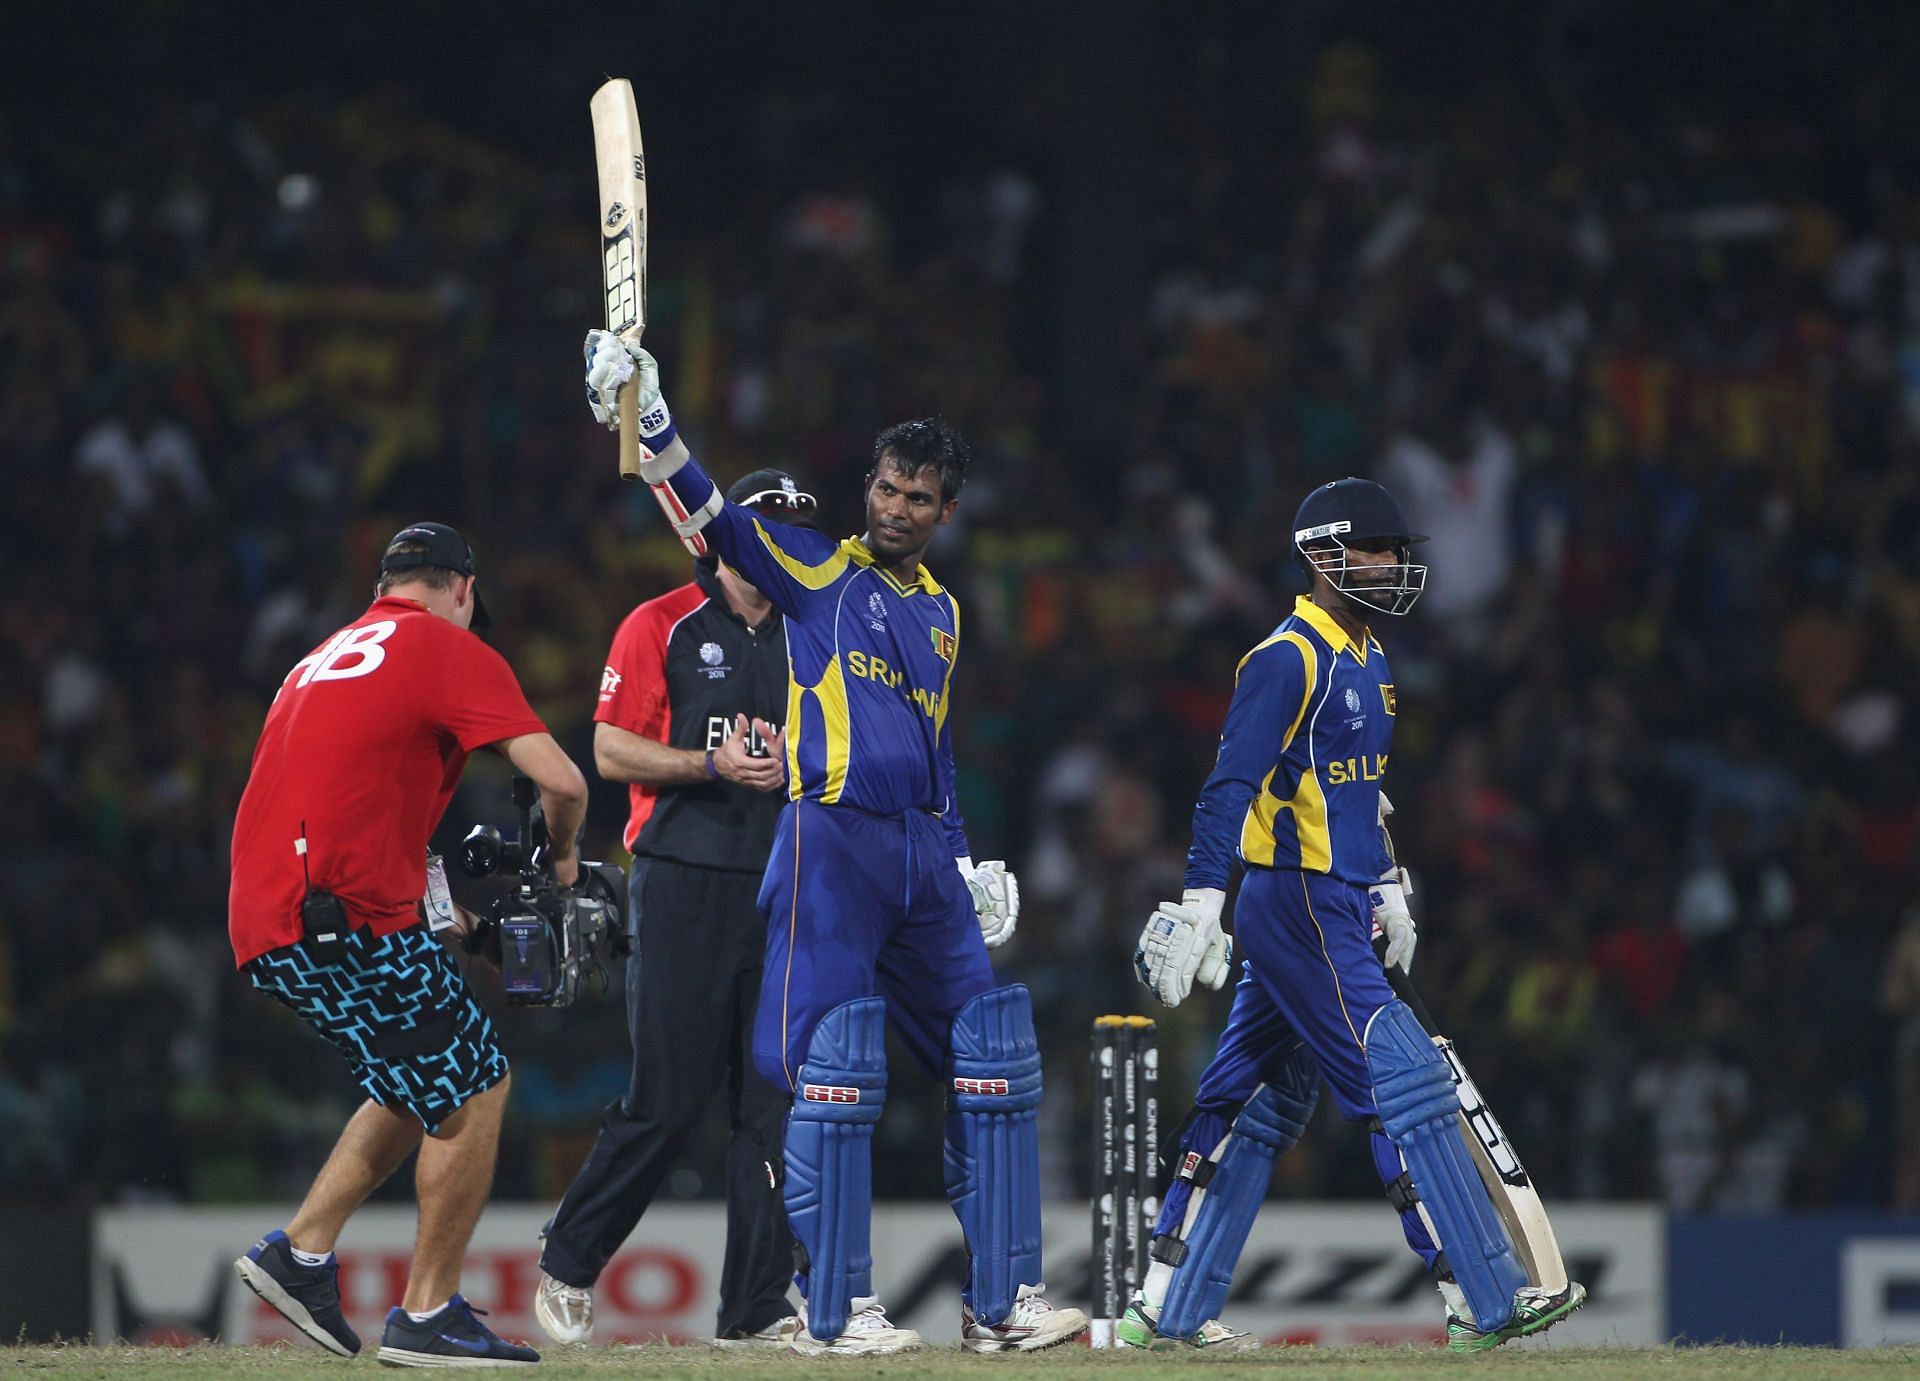 Upul Tharanga scored a century against England in the quarter-finals.